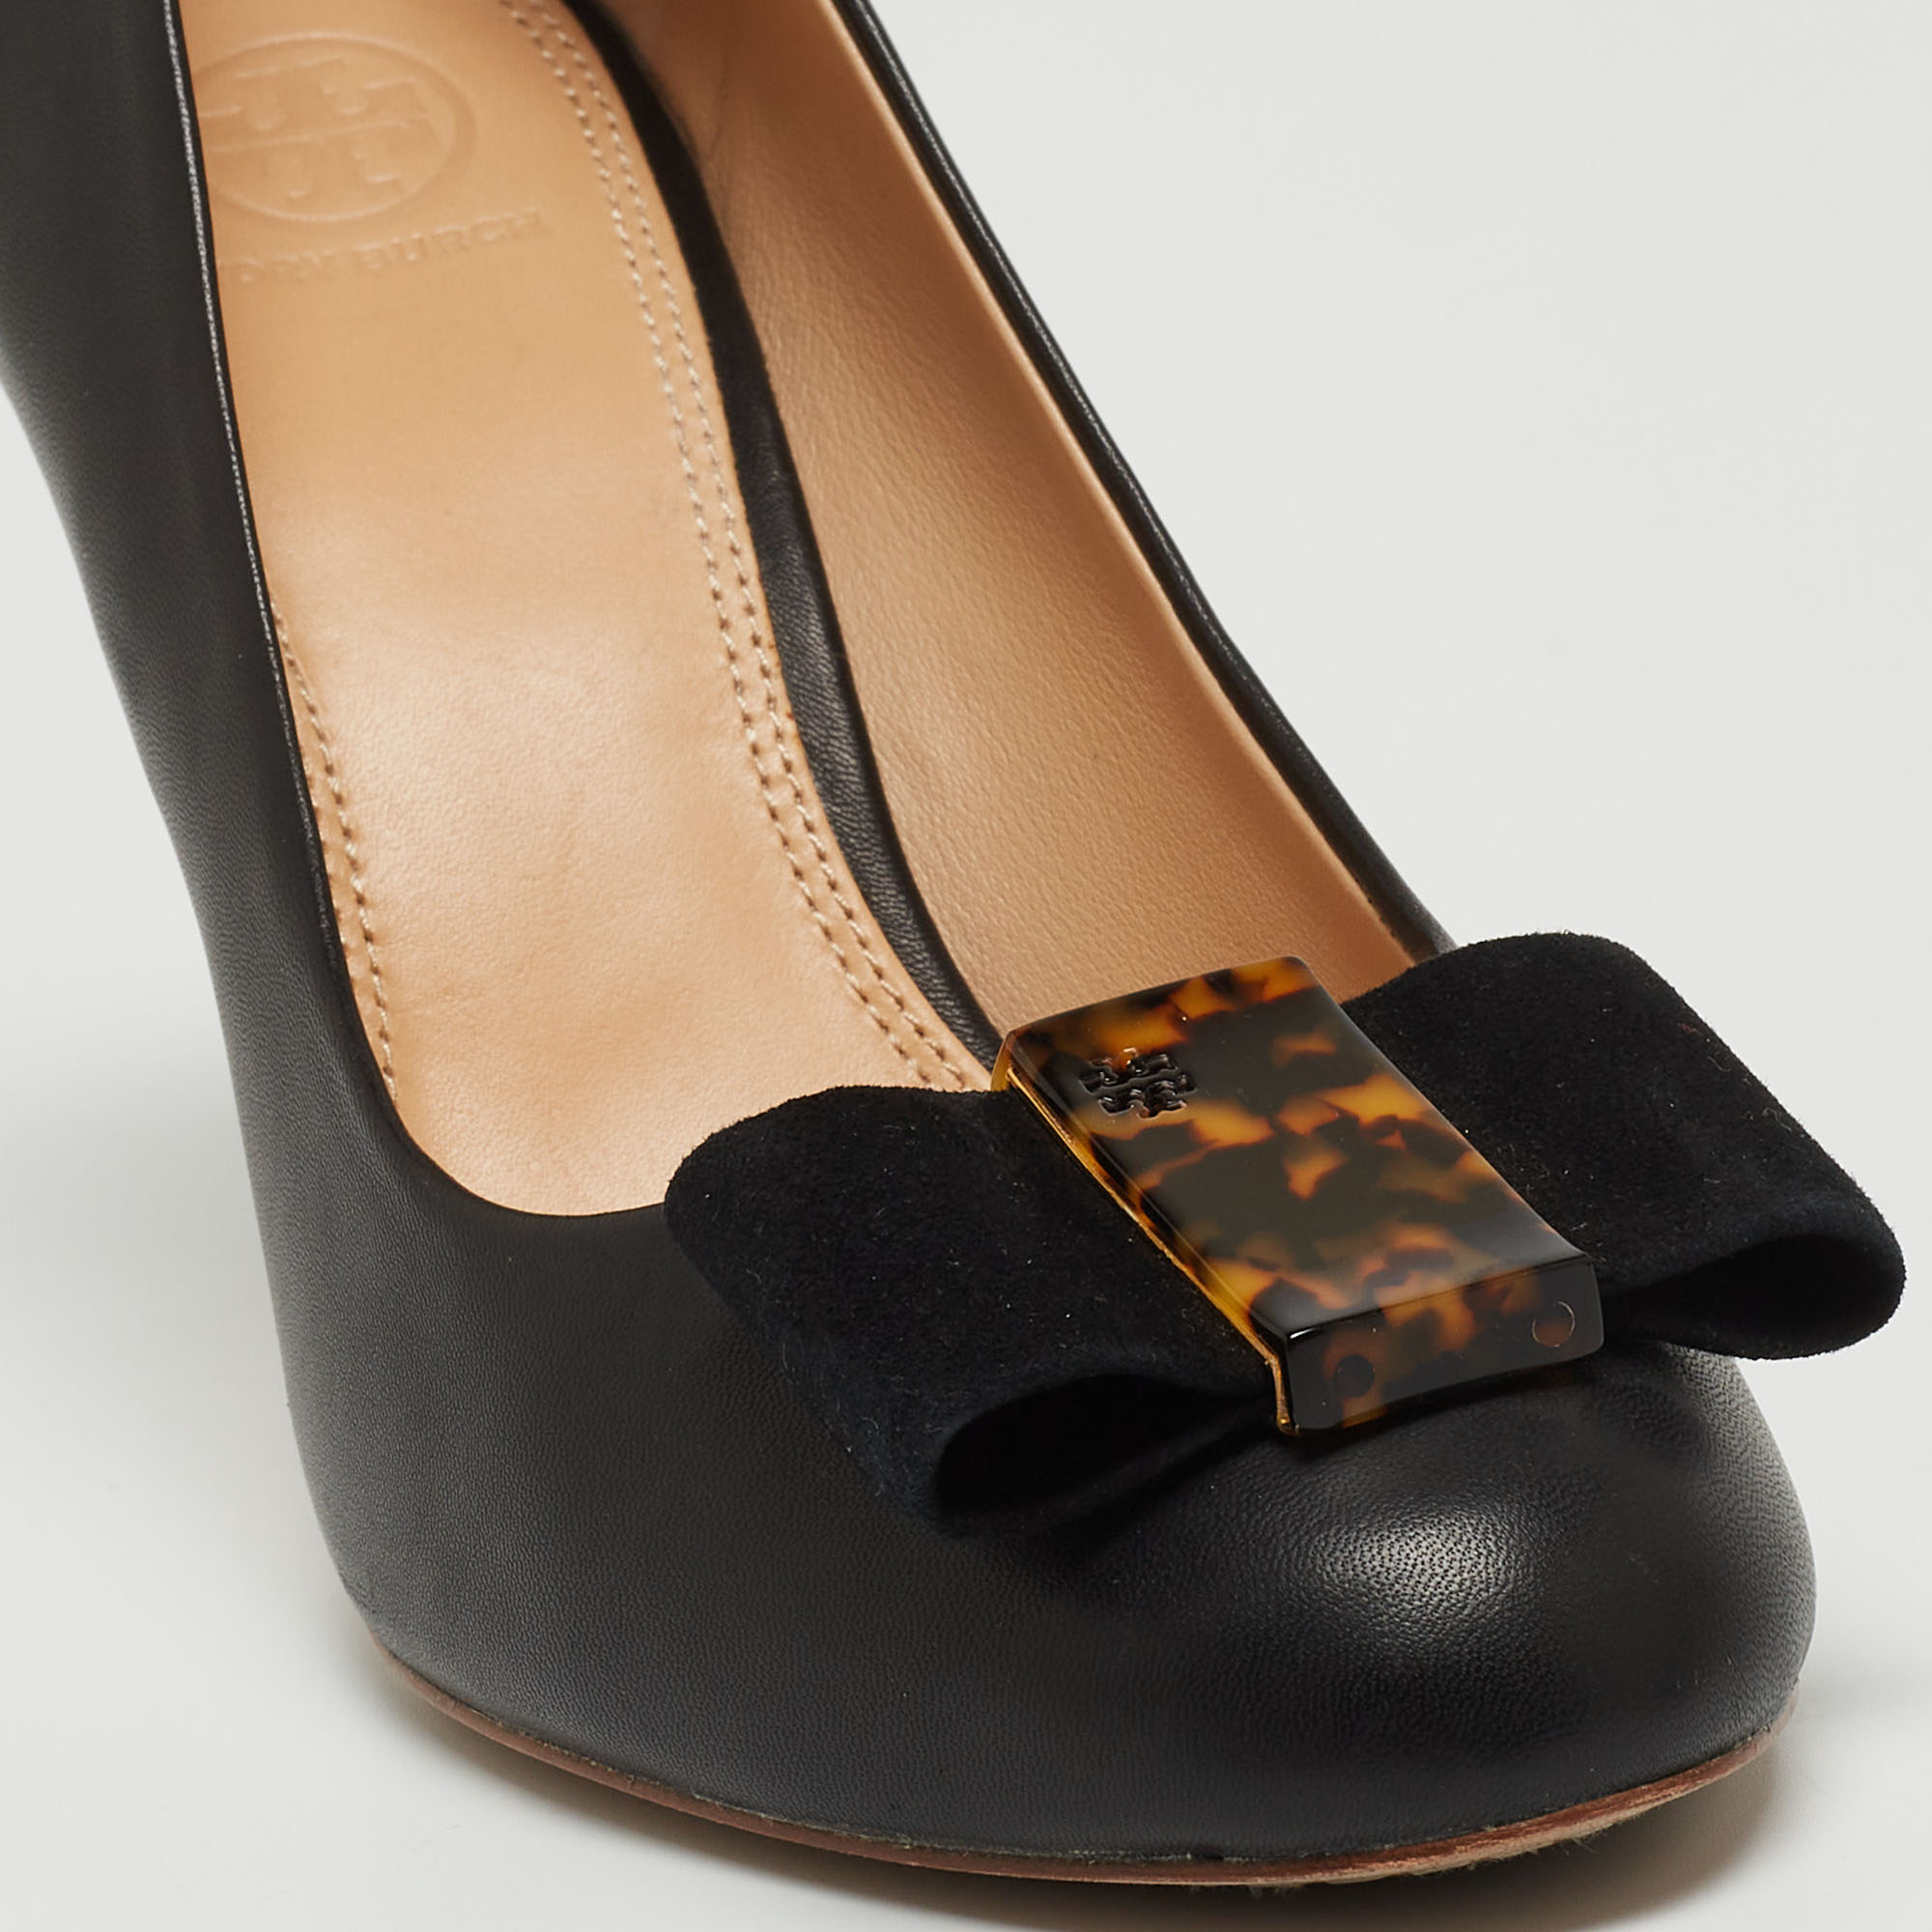 Tory Burch Black Leather And Suede Tortoise Bow Chase Pumps Size 40